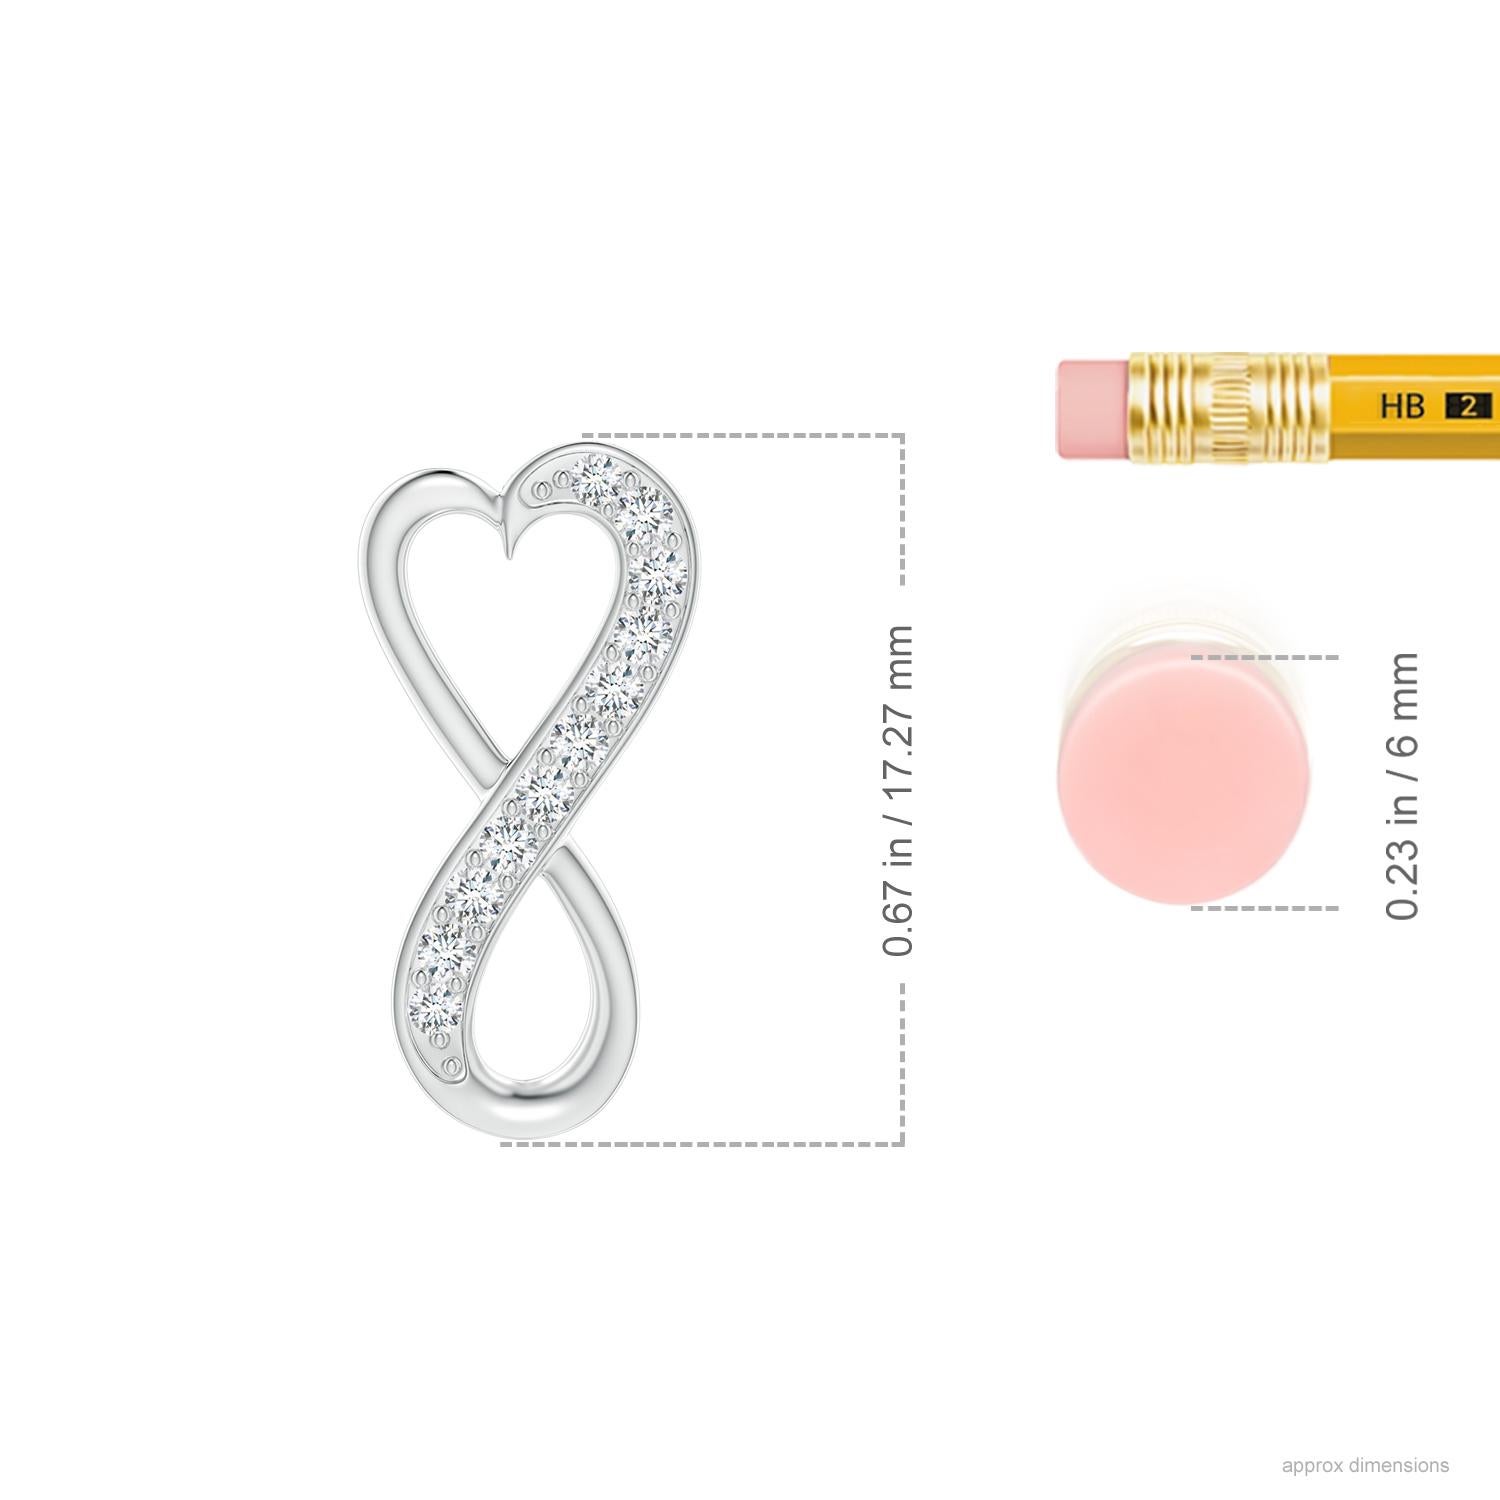 Designed with a hidden bale, this contemporary pendant features a heart frame that extends to form a stunning infinity. Shimmering diamonds partially accentuate the curves of this infinity heart pendant. It is skillfully crafted in patinum.
Diamond